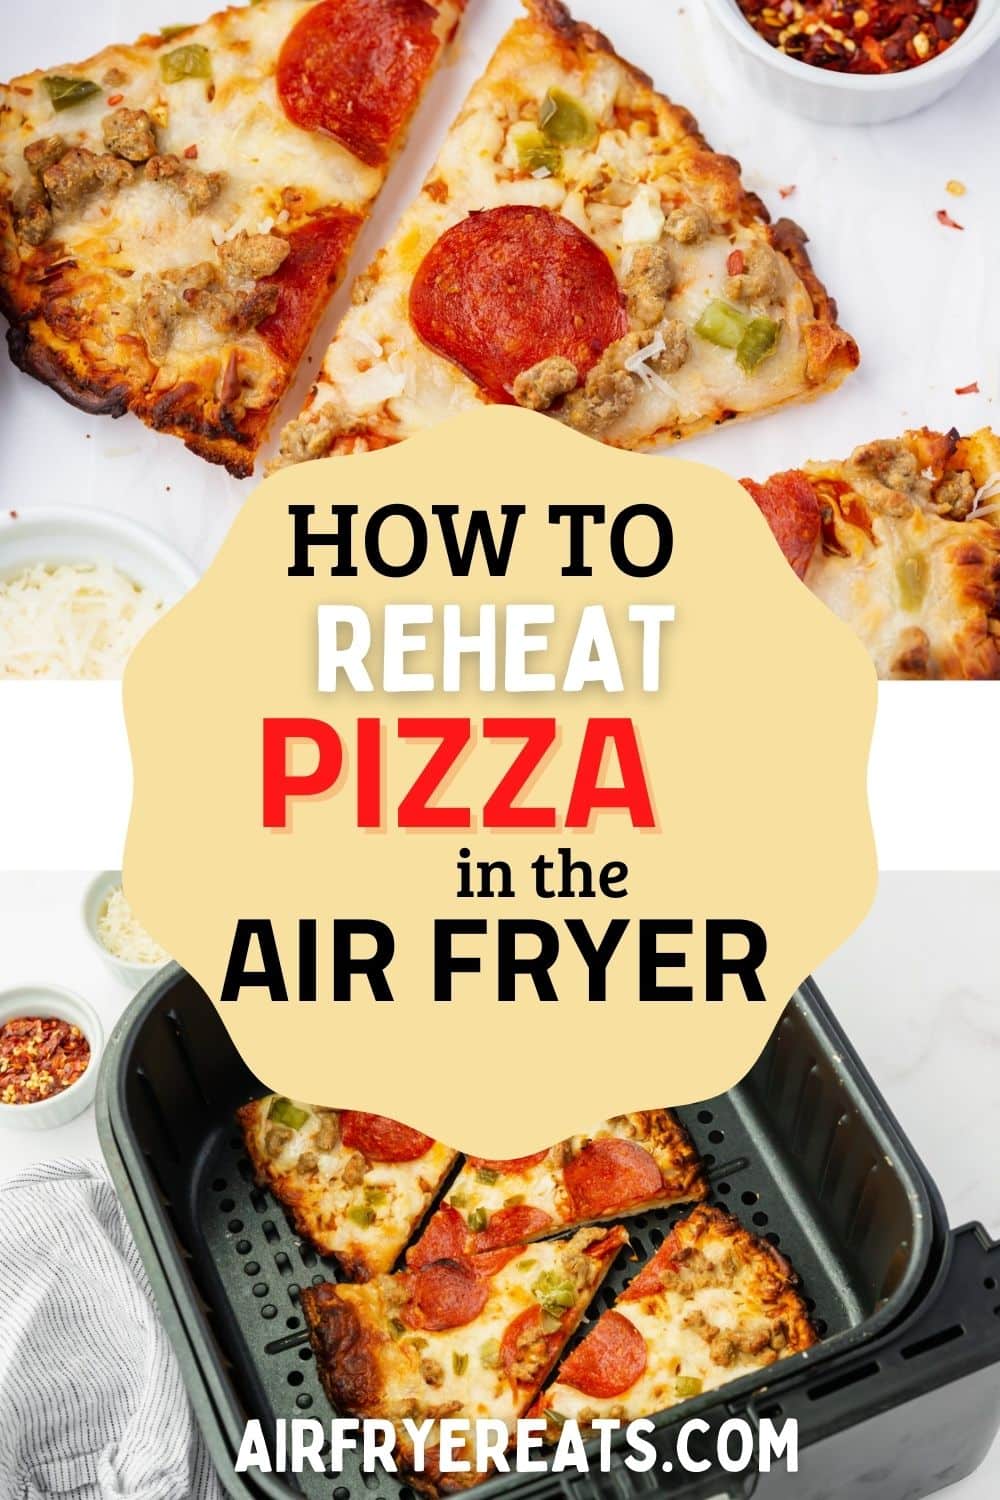 images of pizza reheated in the air fryer. Text in circle says How to reheat pizza in air fryer"